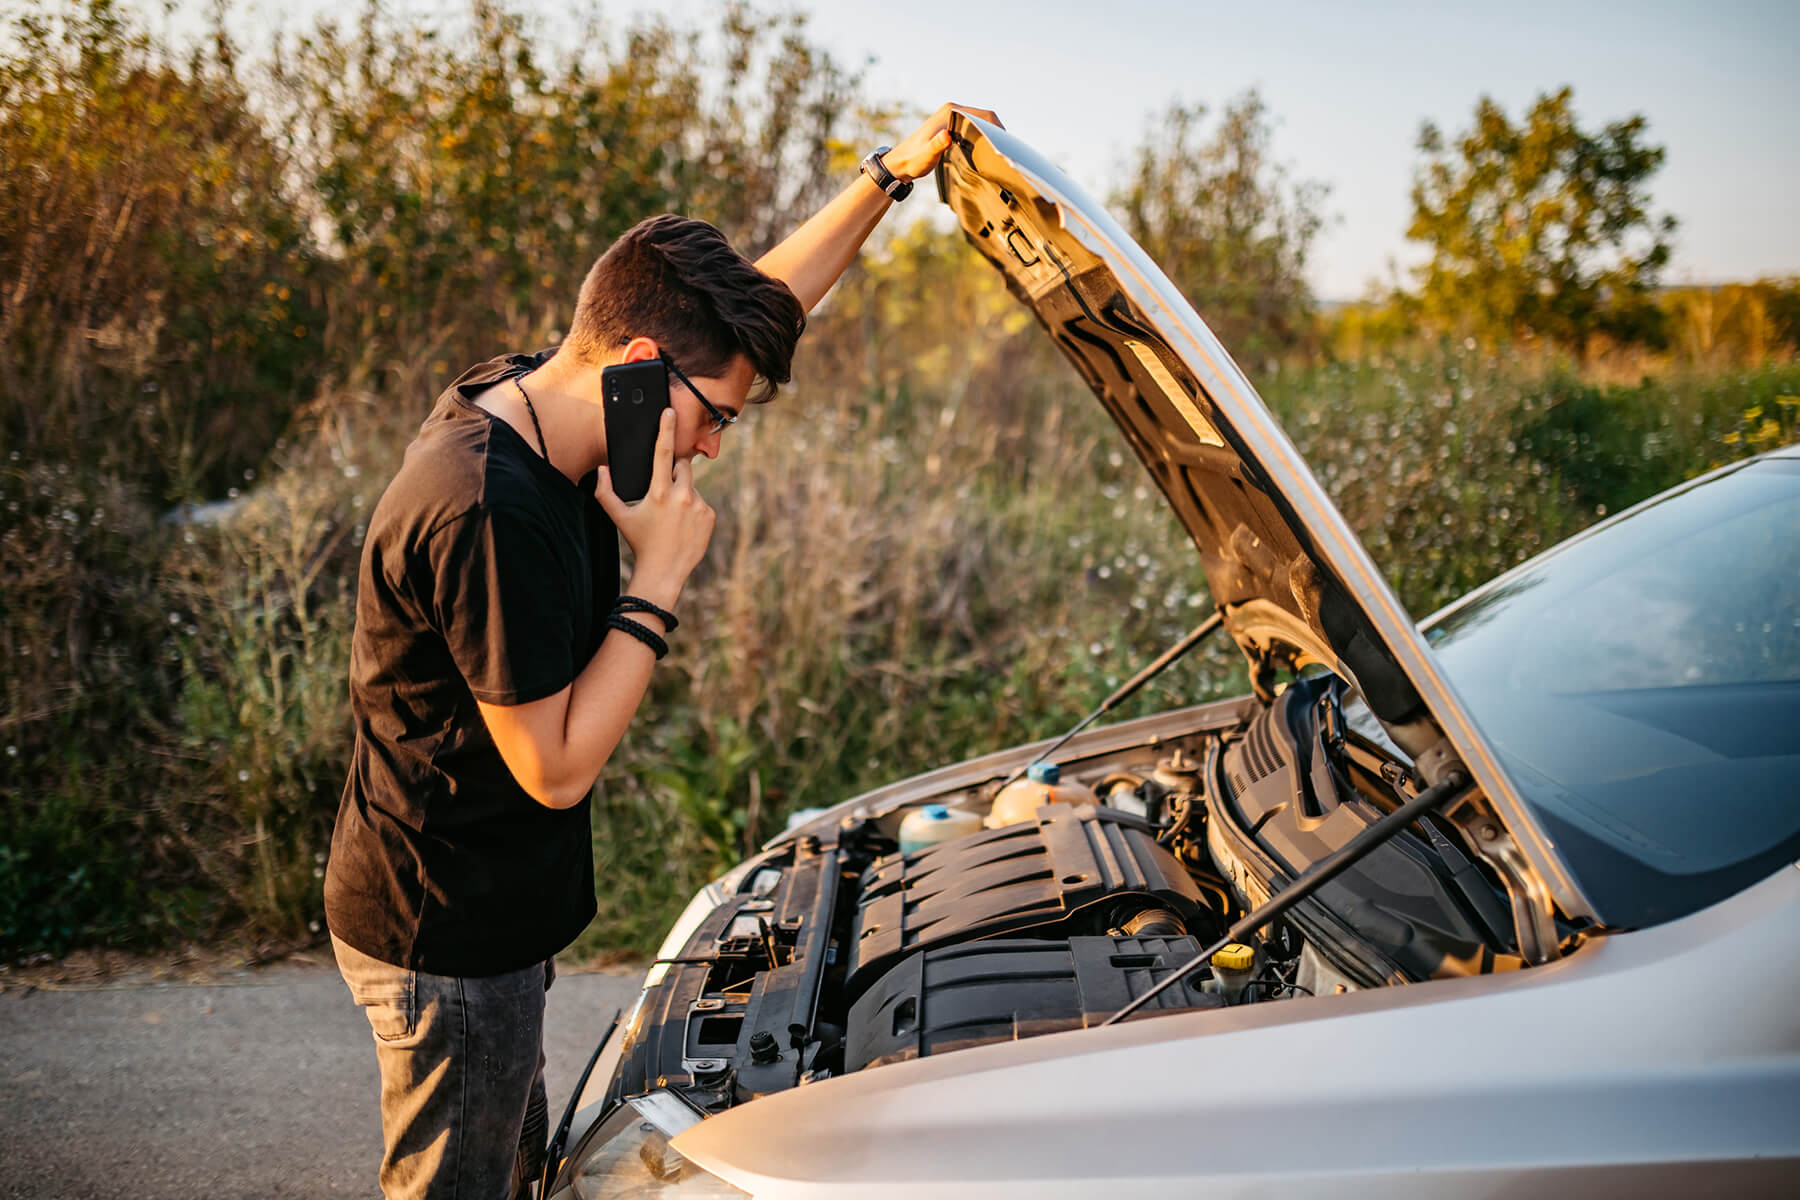 A young man looks under the hood of his car while making a call on his cellphone